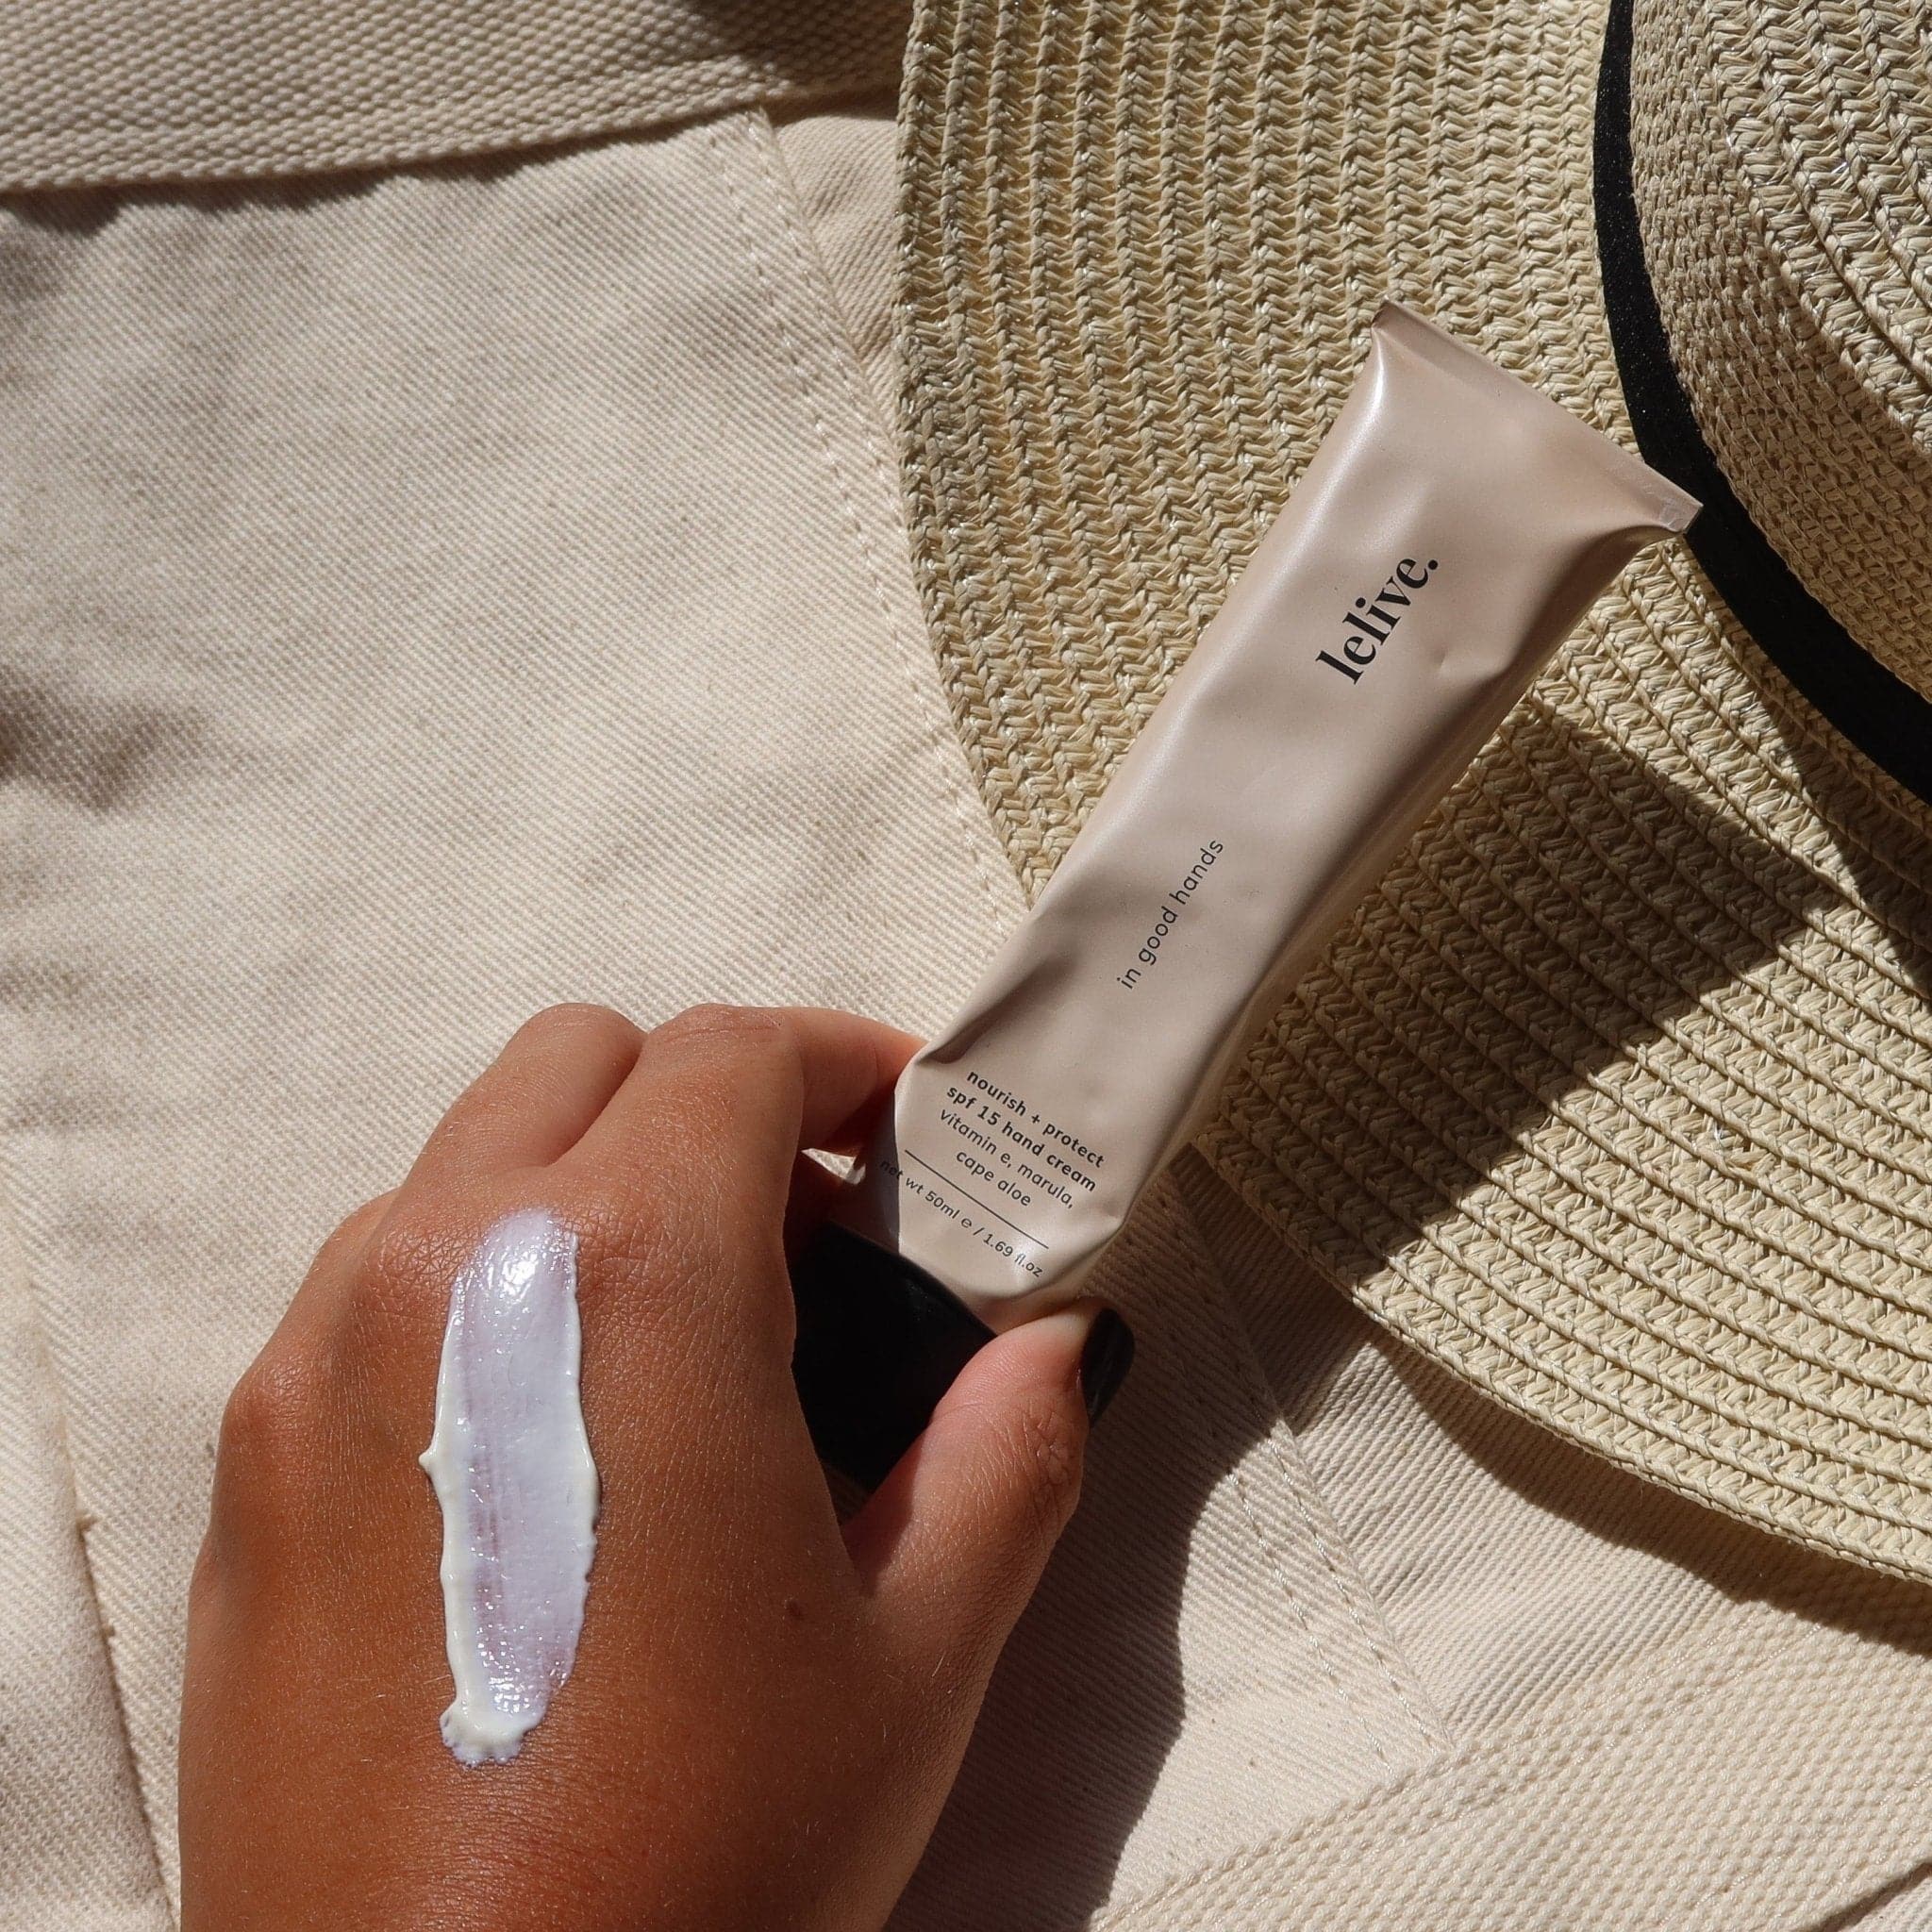 in good hands | nourish + protect spf 15 hand cream - lelive